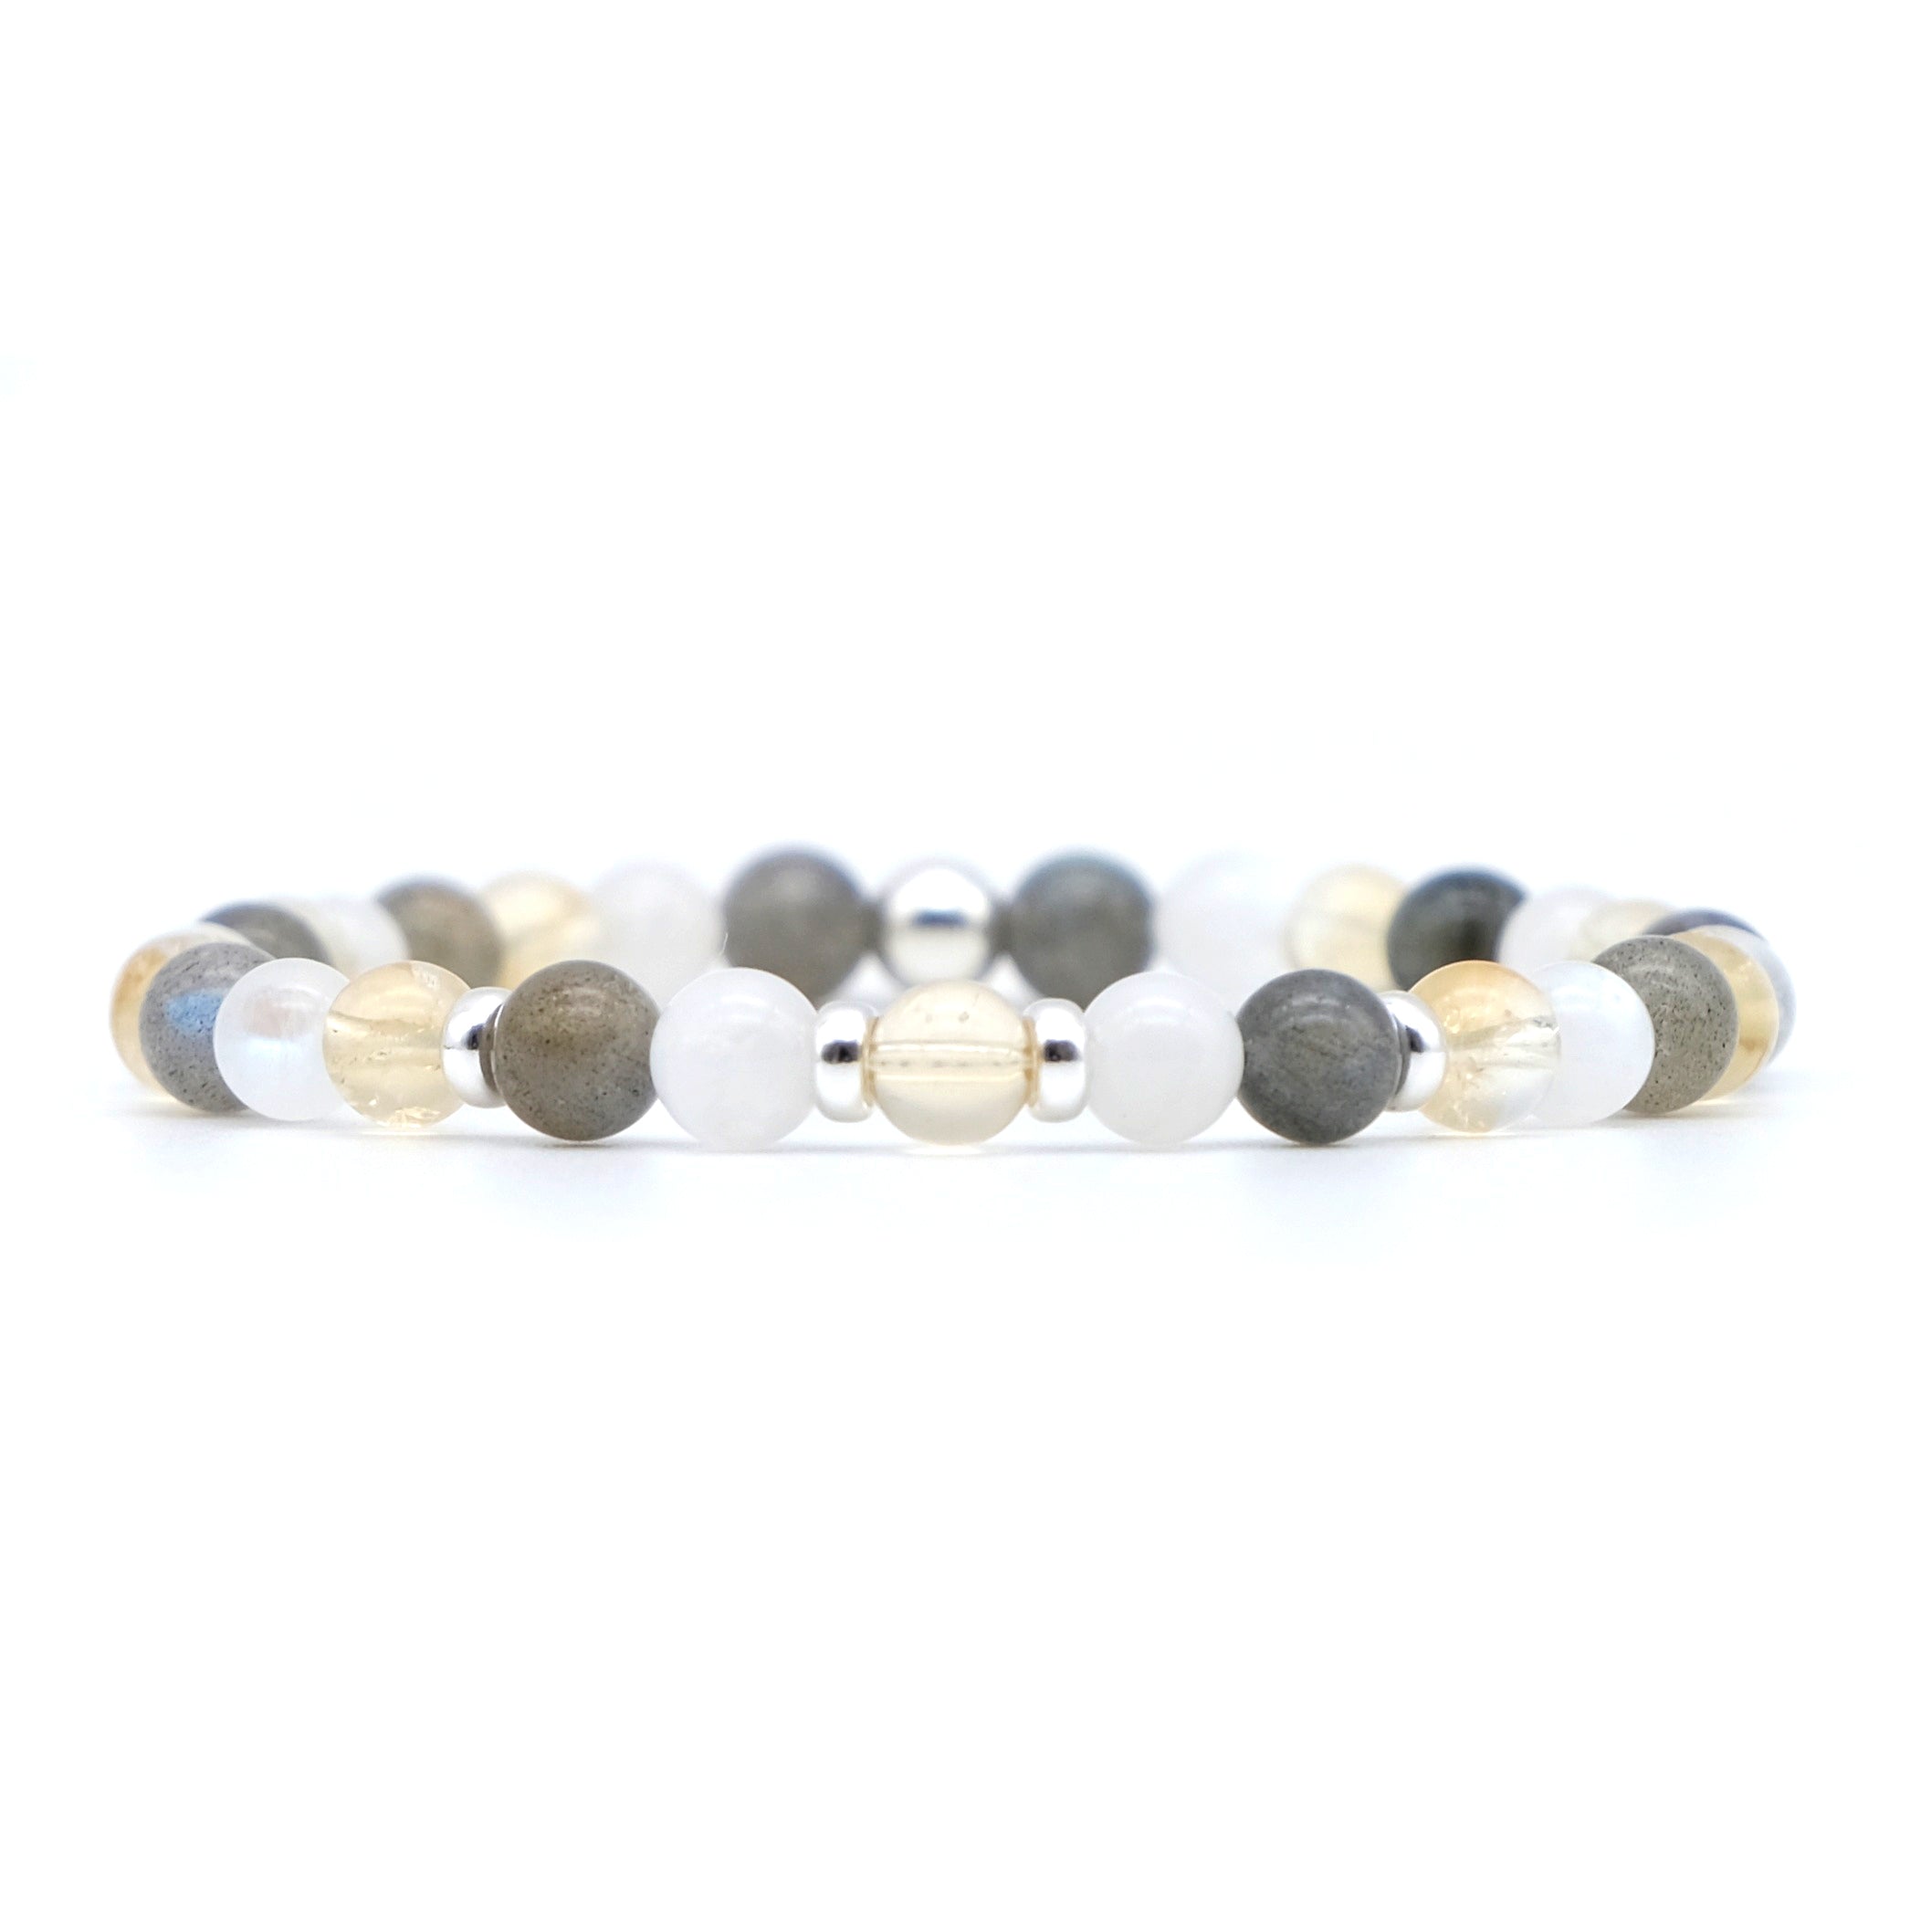 A citrine, labradorite and moonstone gemstone bracelet in 6mm beads with silver accessories